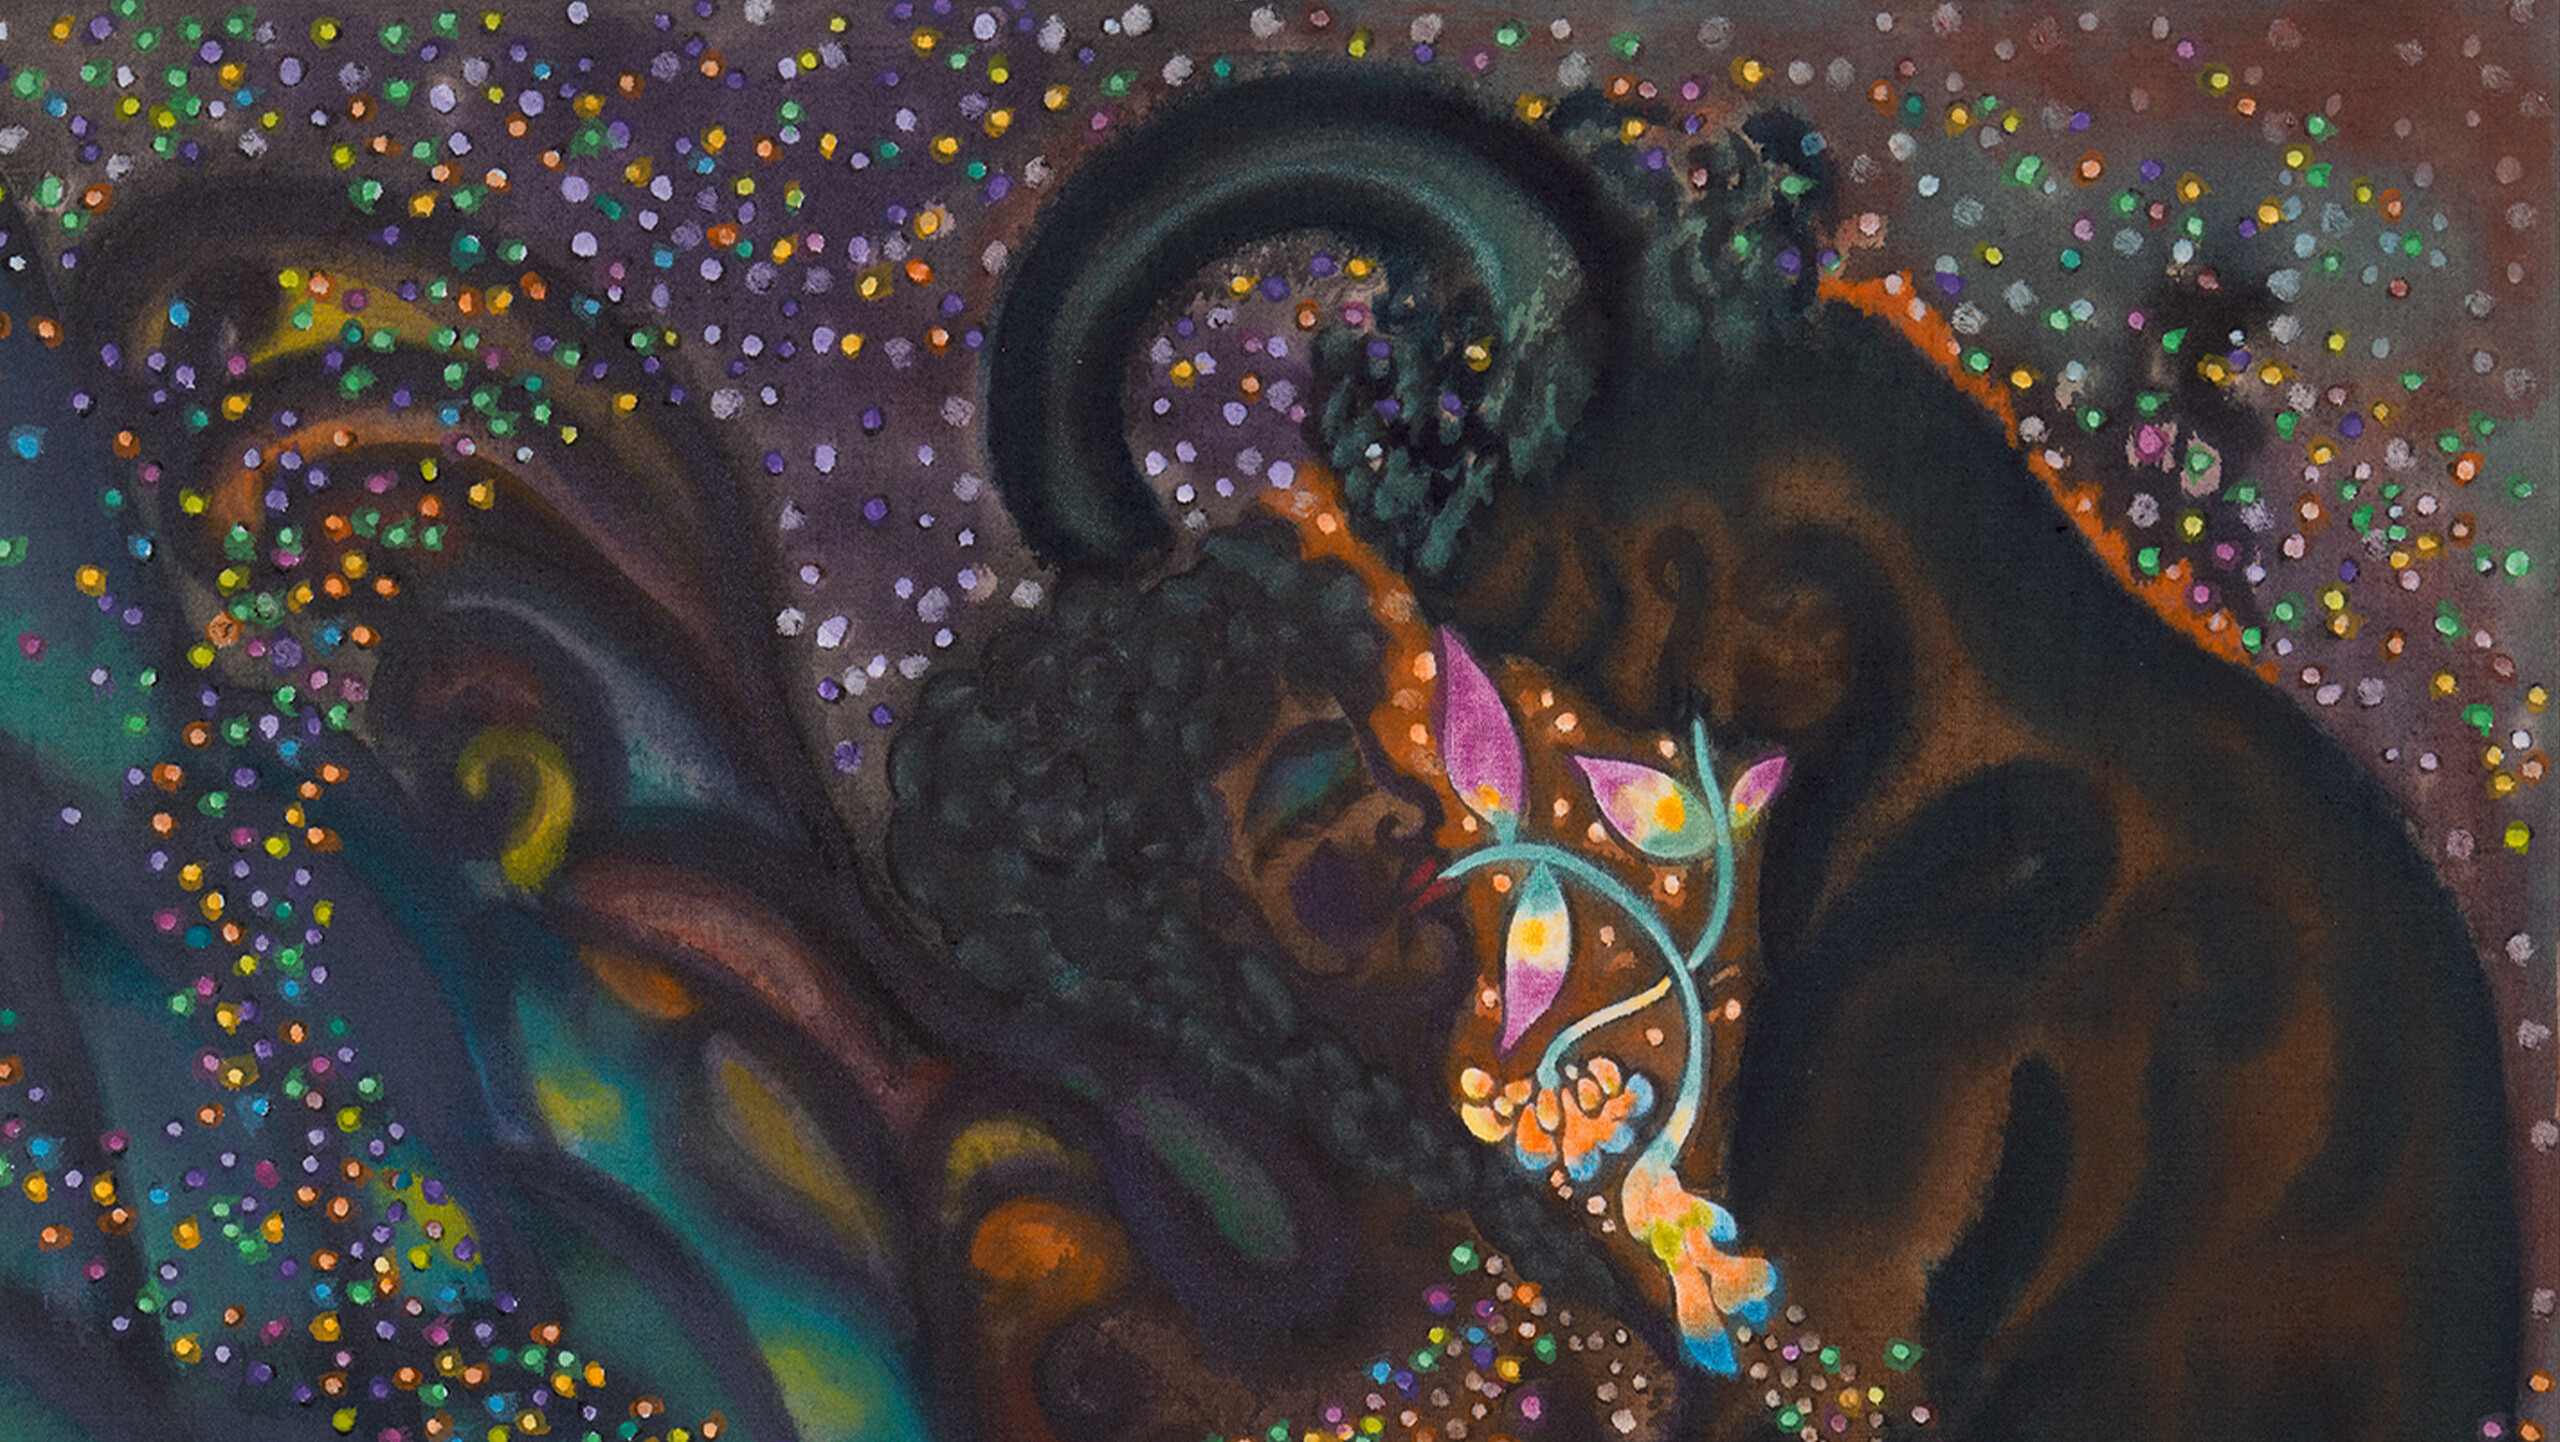 A Chris Ofili painting titled Waterfall - flower eaters, 2022 (detail view)